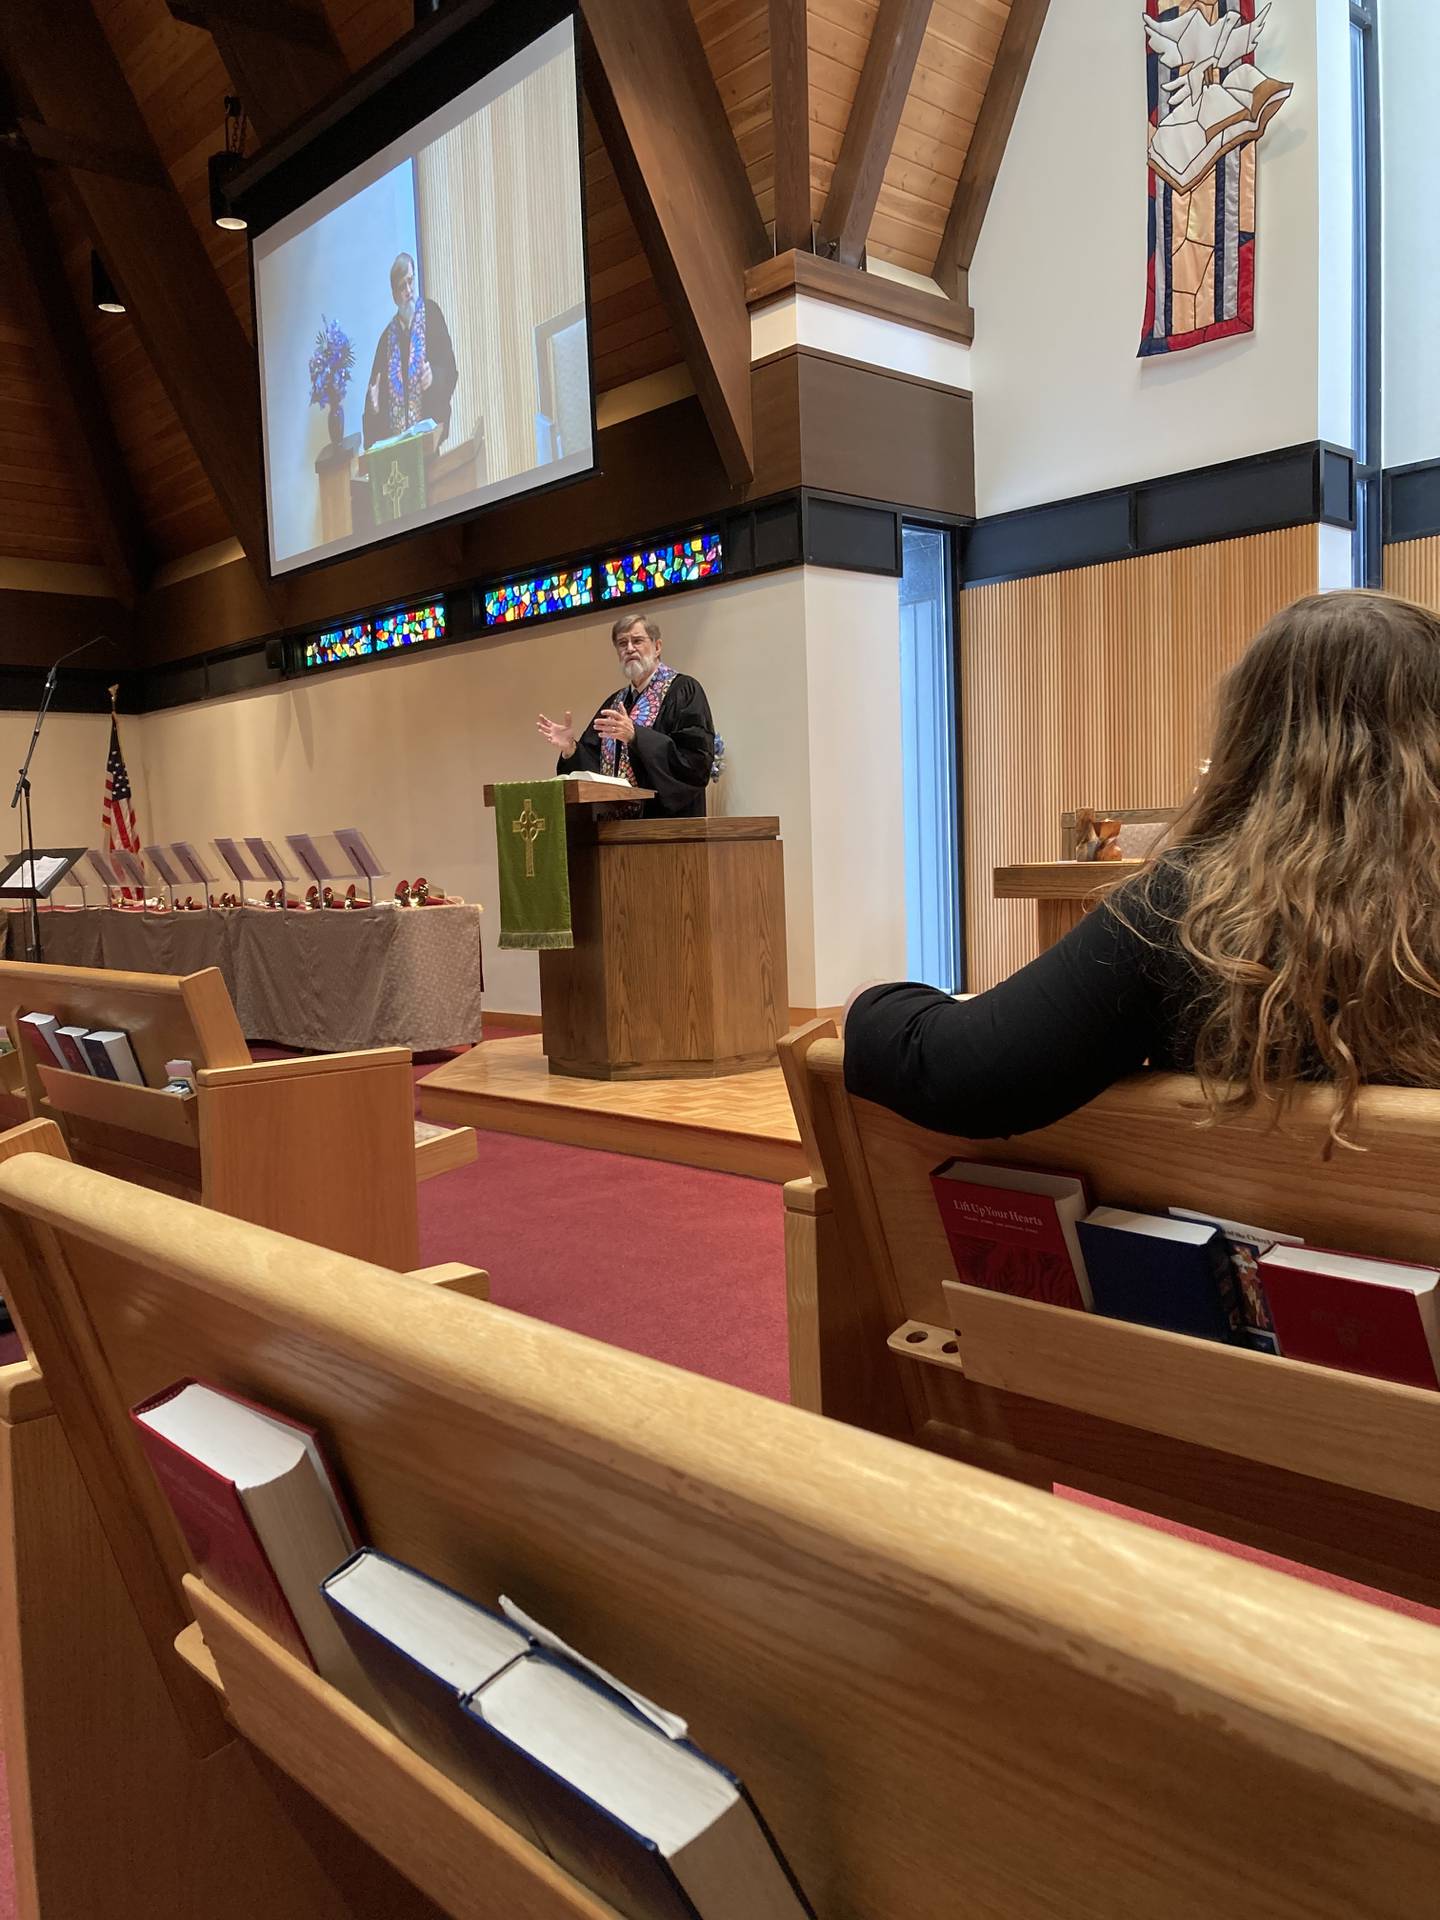 The Reverend Blake Richter recently returned to Westminster Presbyterian Church of DeKalb from a three-month sabbatical leave.